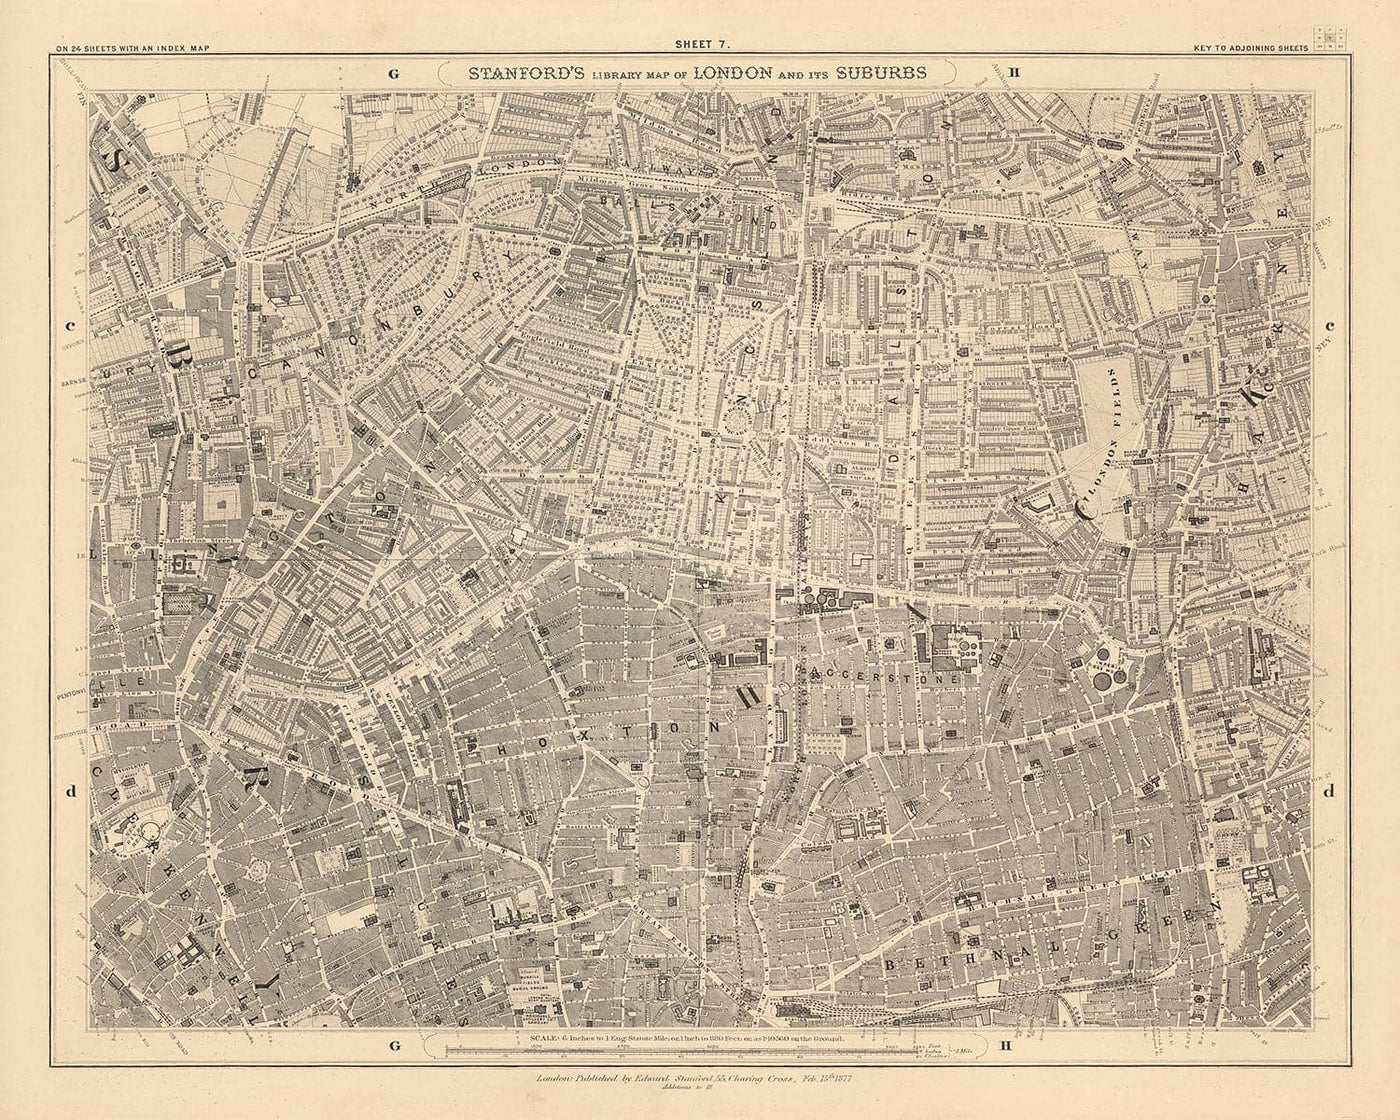 Old Map of London in 1862 by Edward Stanford - Hoxton, Haggerston, Dalston, Hackney, Bethnal Green, Shoreditch - N1, N5, E8, E2, EC1